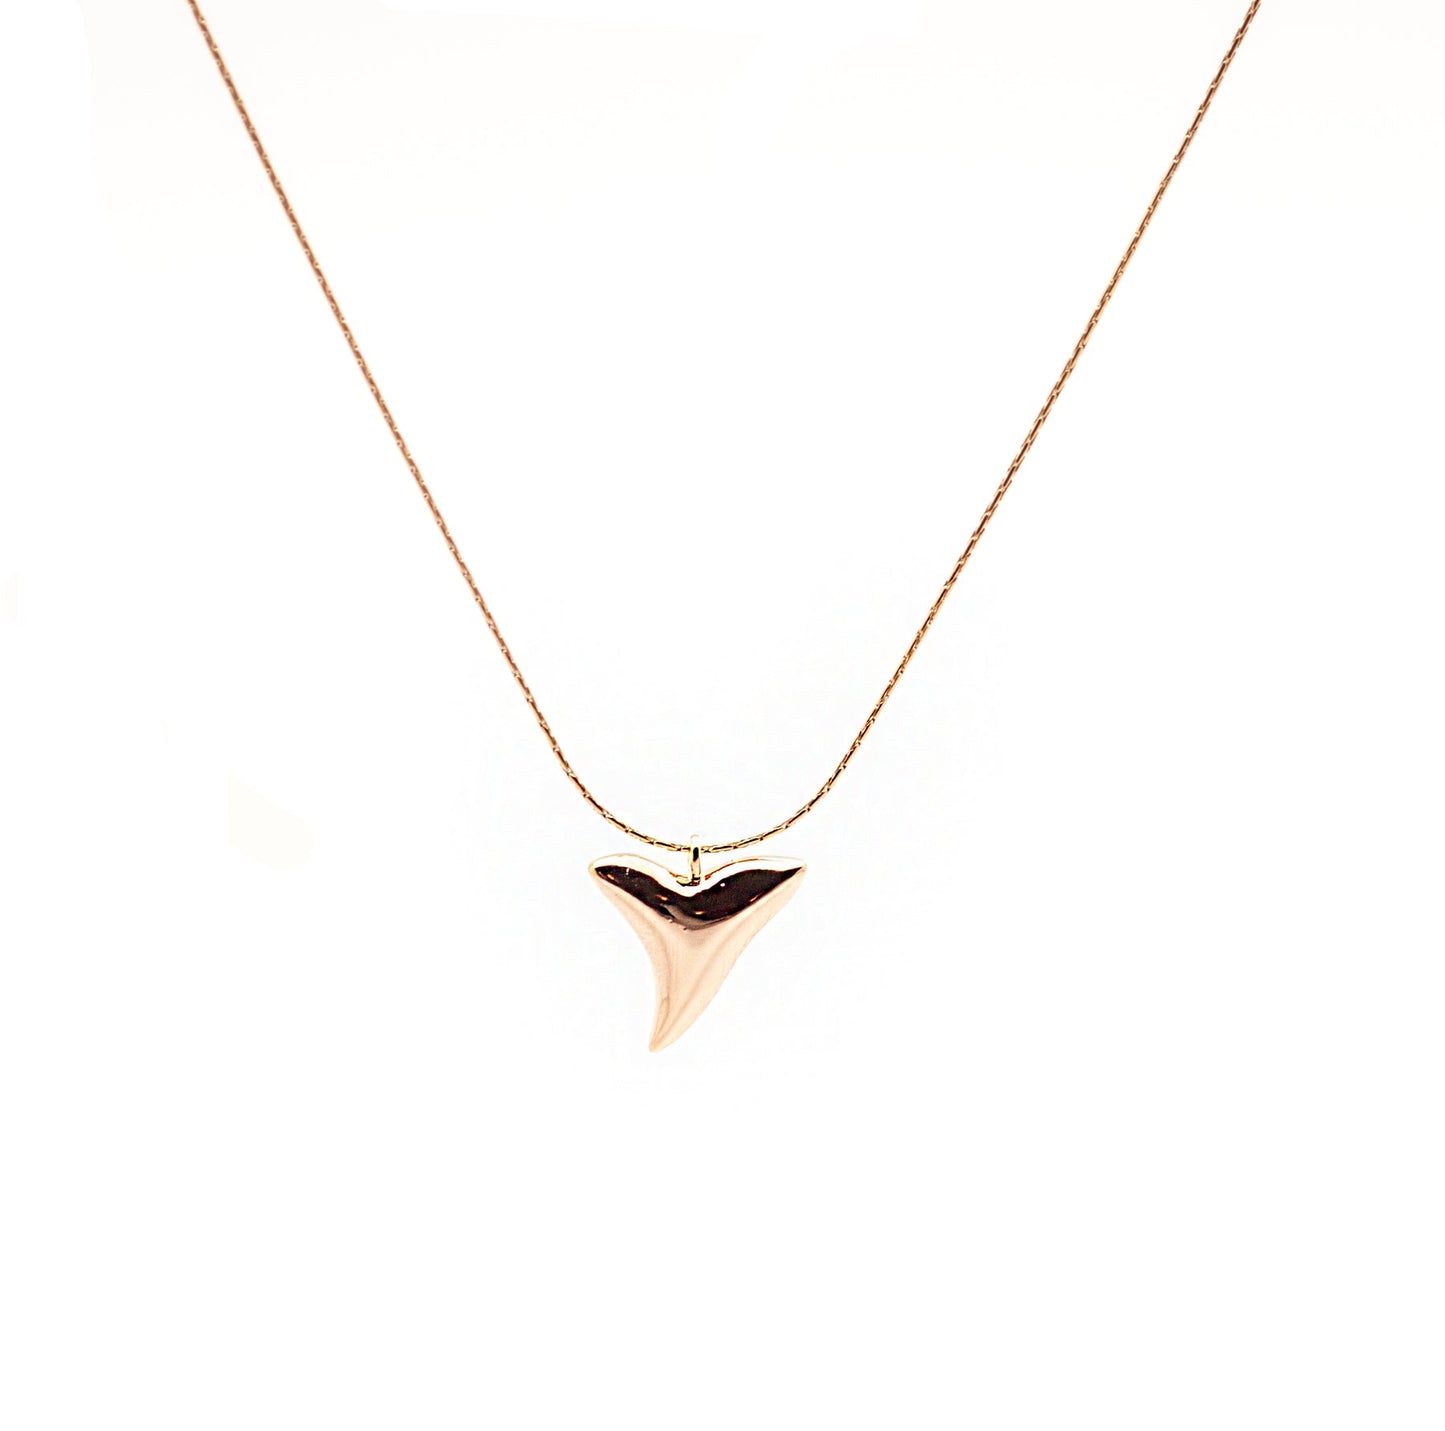 Salty Cali Shark Tooth Necklace - Gold